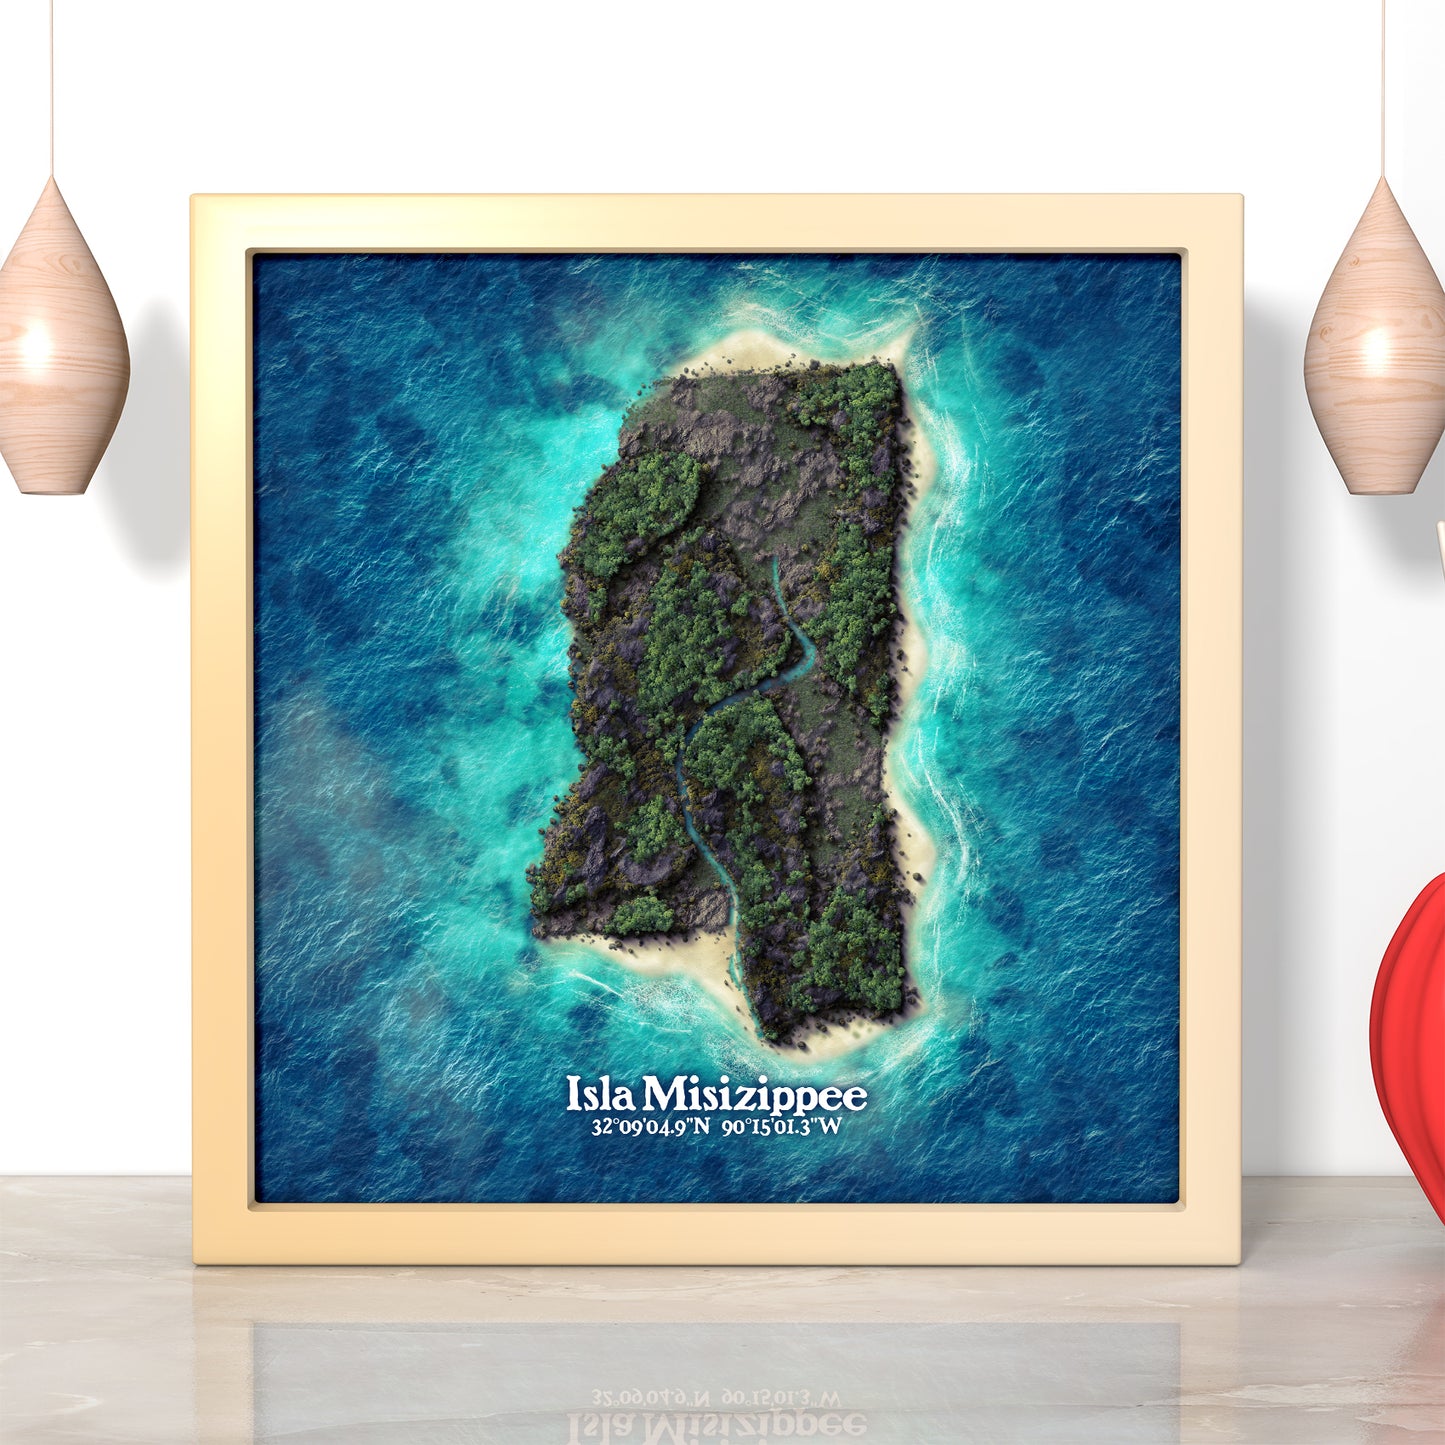 Mississippi state as an island print (Isla Misizippee). Novelty art - imagine your state as a desert island.